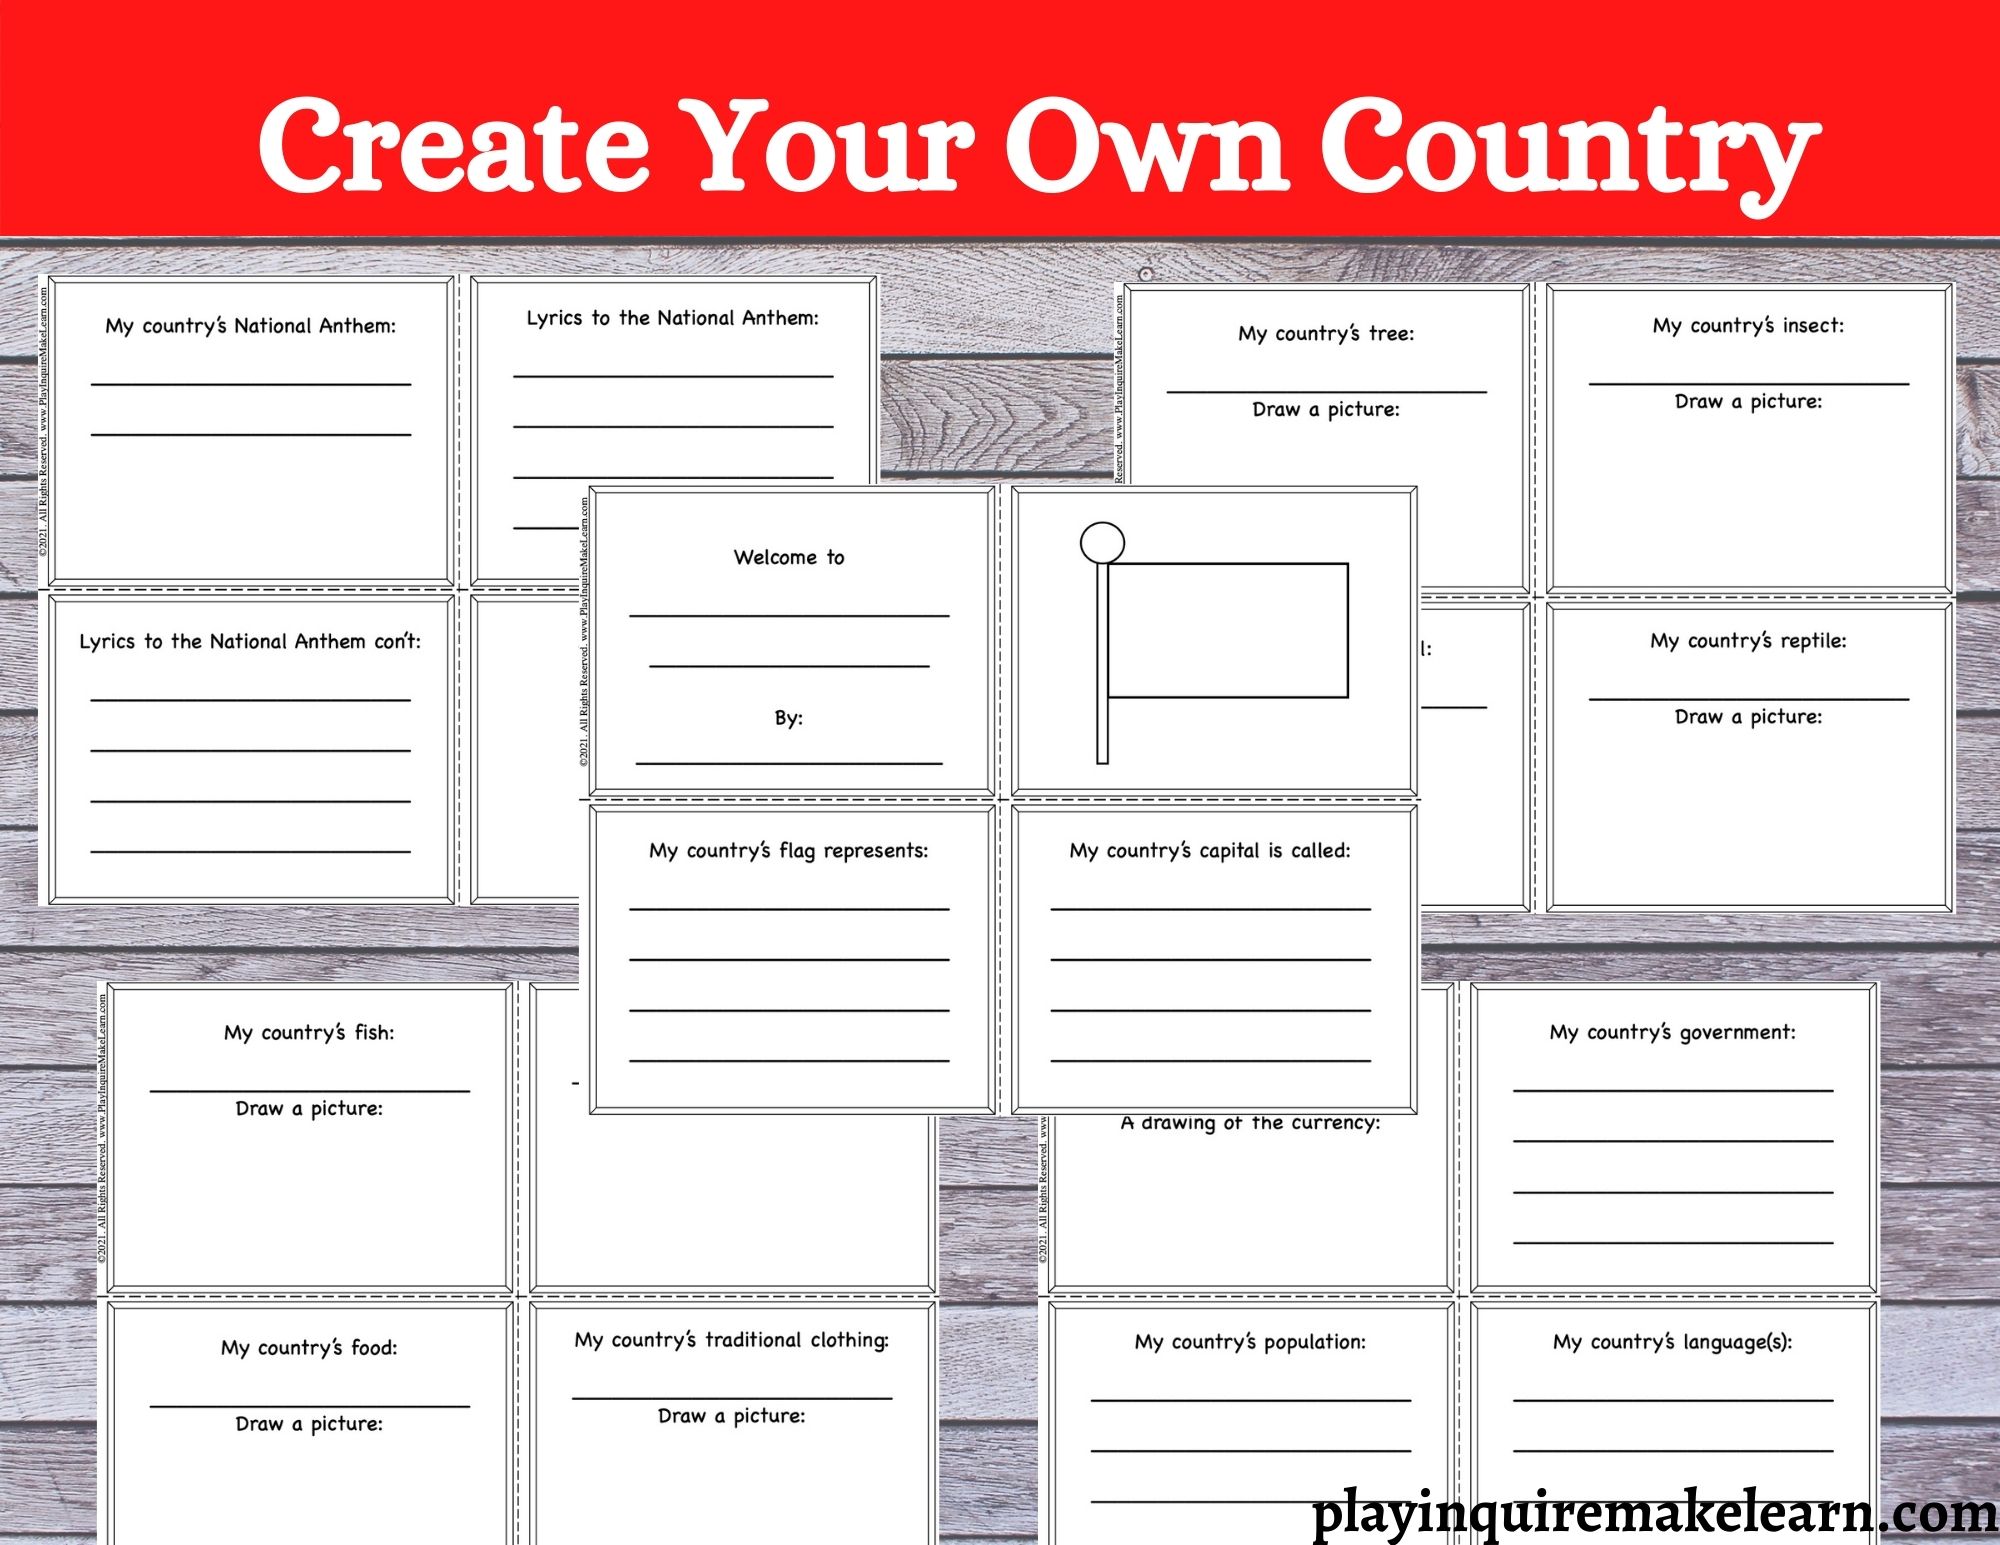 Create Your Own Country Flip Book Play Inquire Make Learn